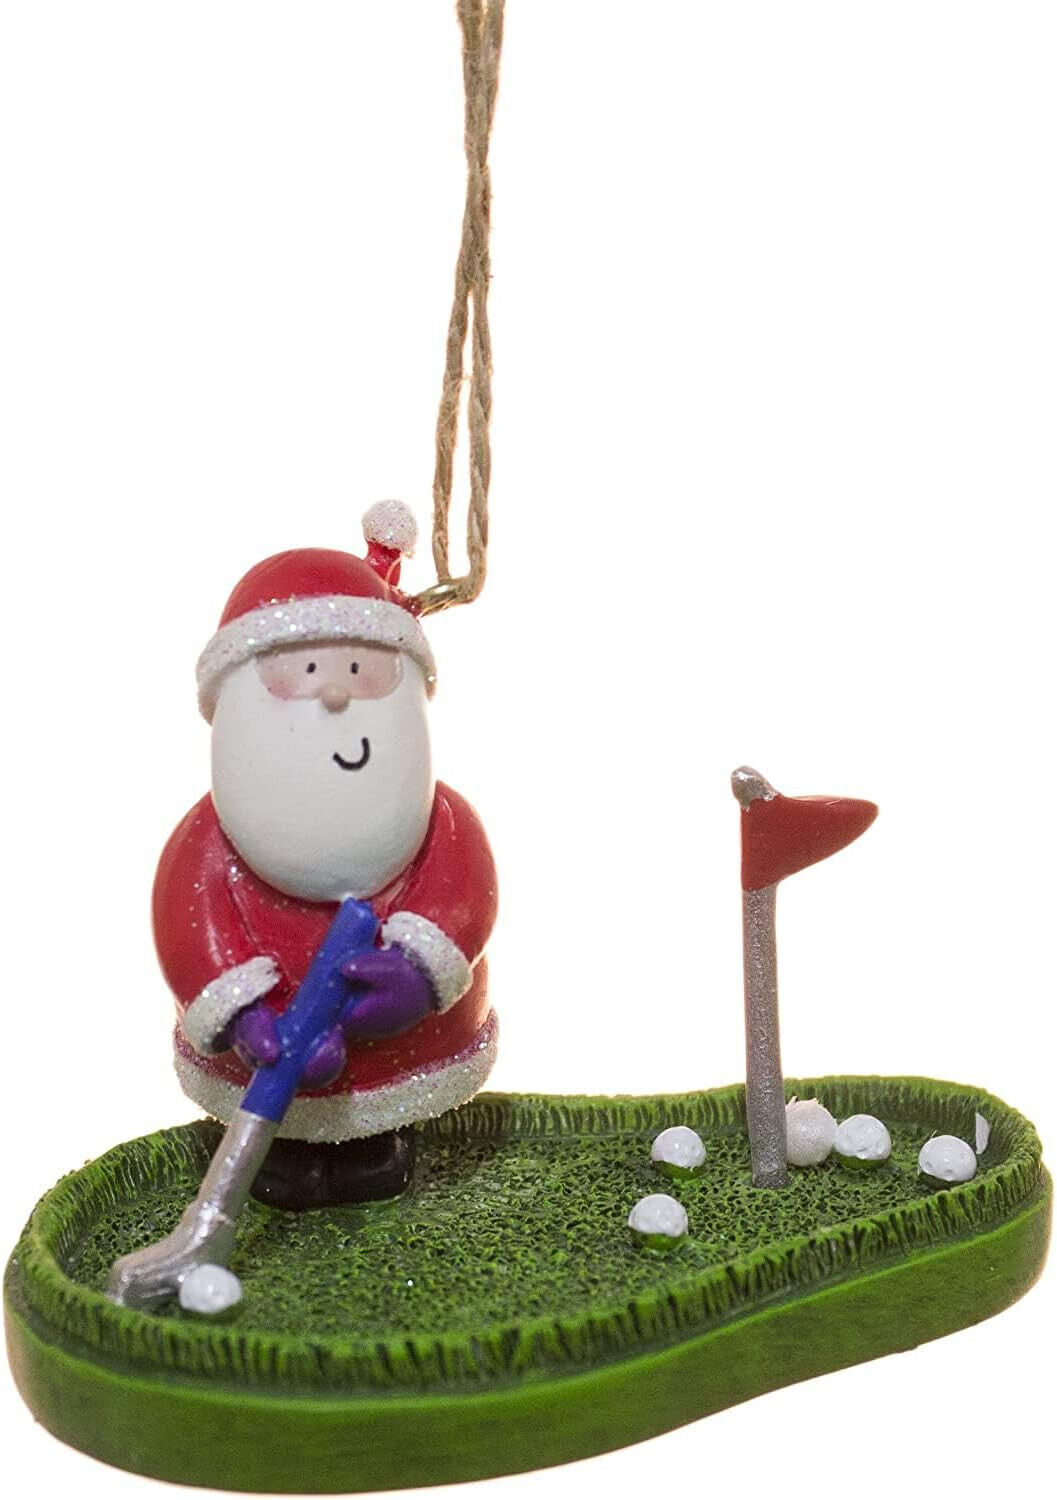 Santa Claus on The Putting Green Ornament, Christmas Ornament, Holiday Decor